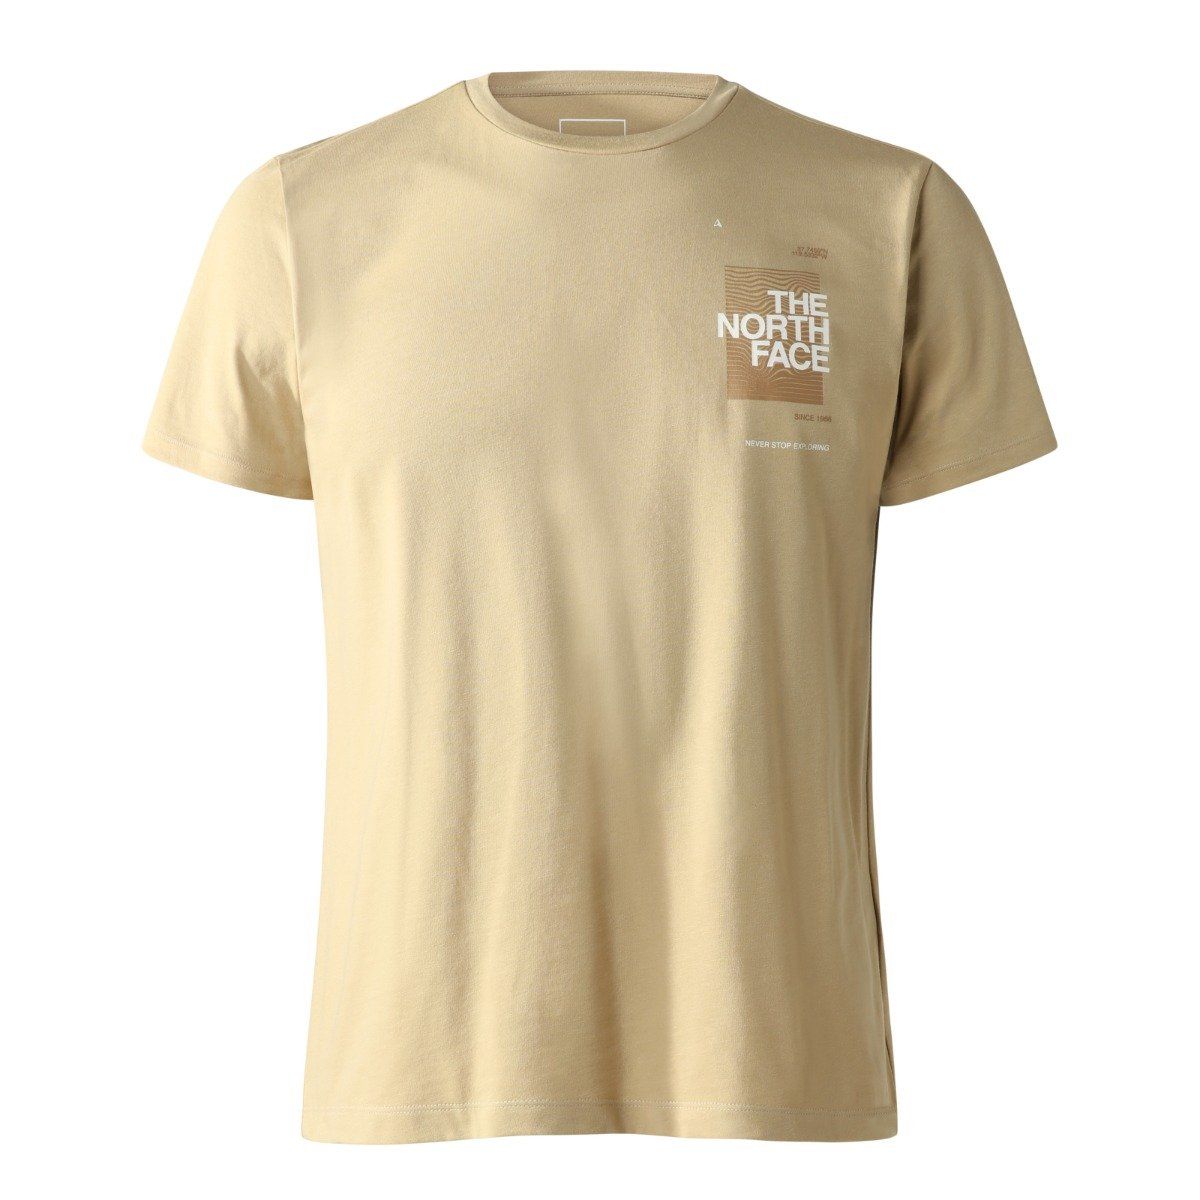 The North Face - M's FOUNDATION GRAPHIC LEFT CHEST LOGO TEE